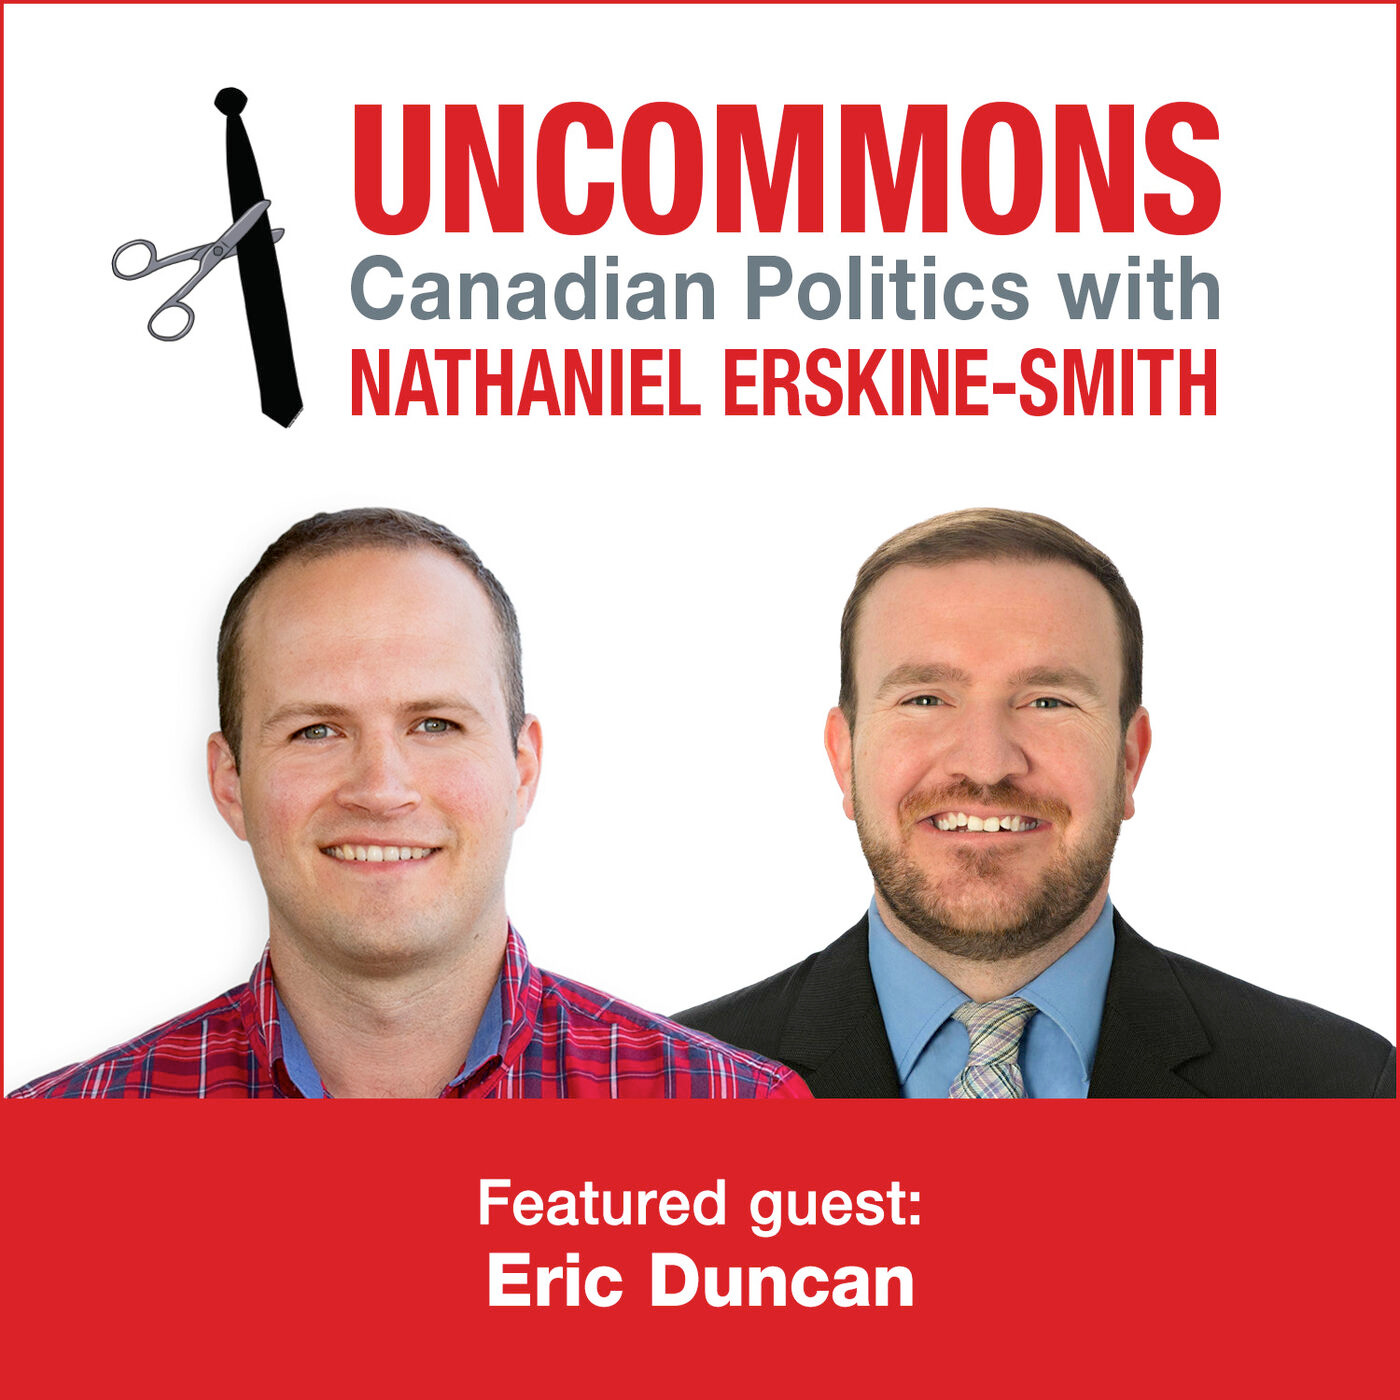 Gay and openly Conservative with Eric Duncan